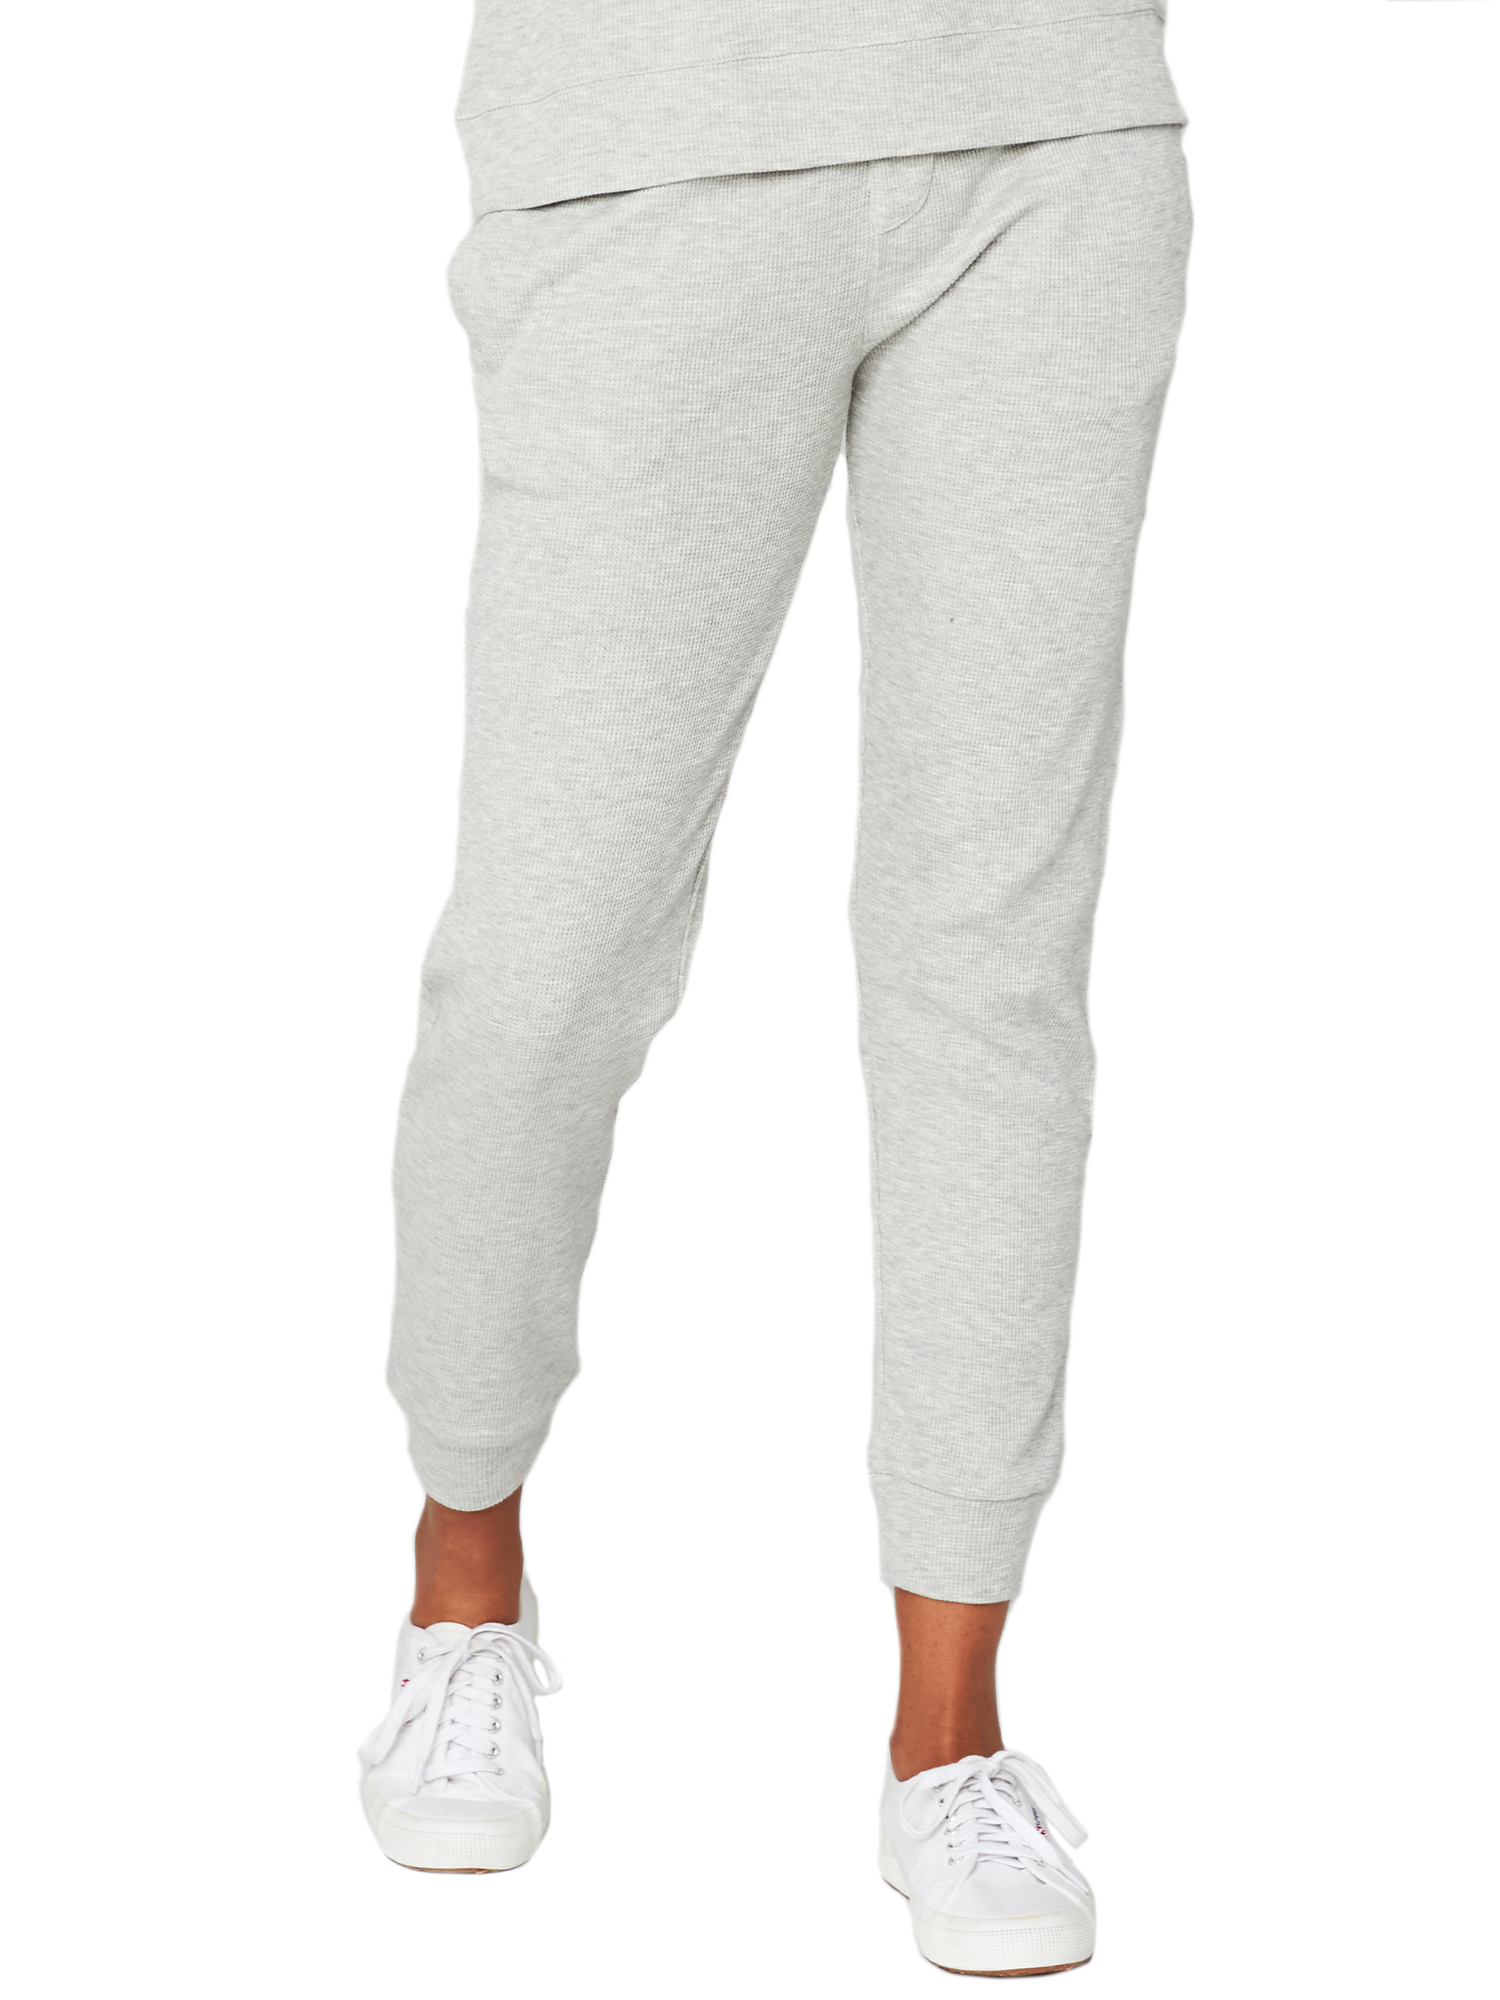 Threads 4 Thought Women's Athleisure Thermal Jogger - image 1 of 3